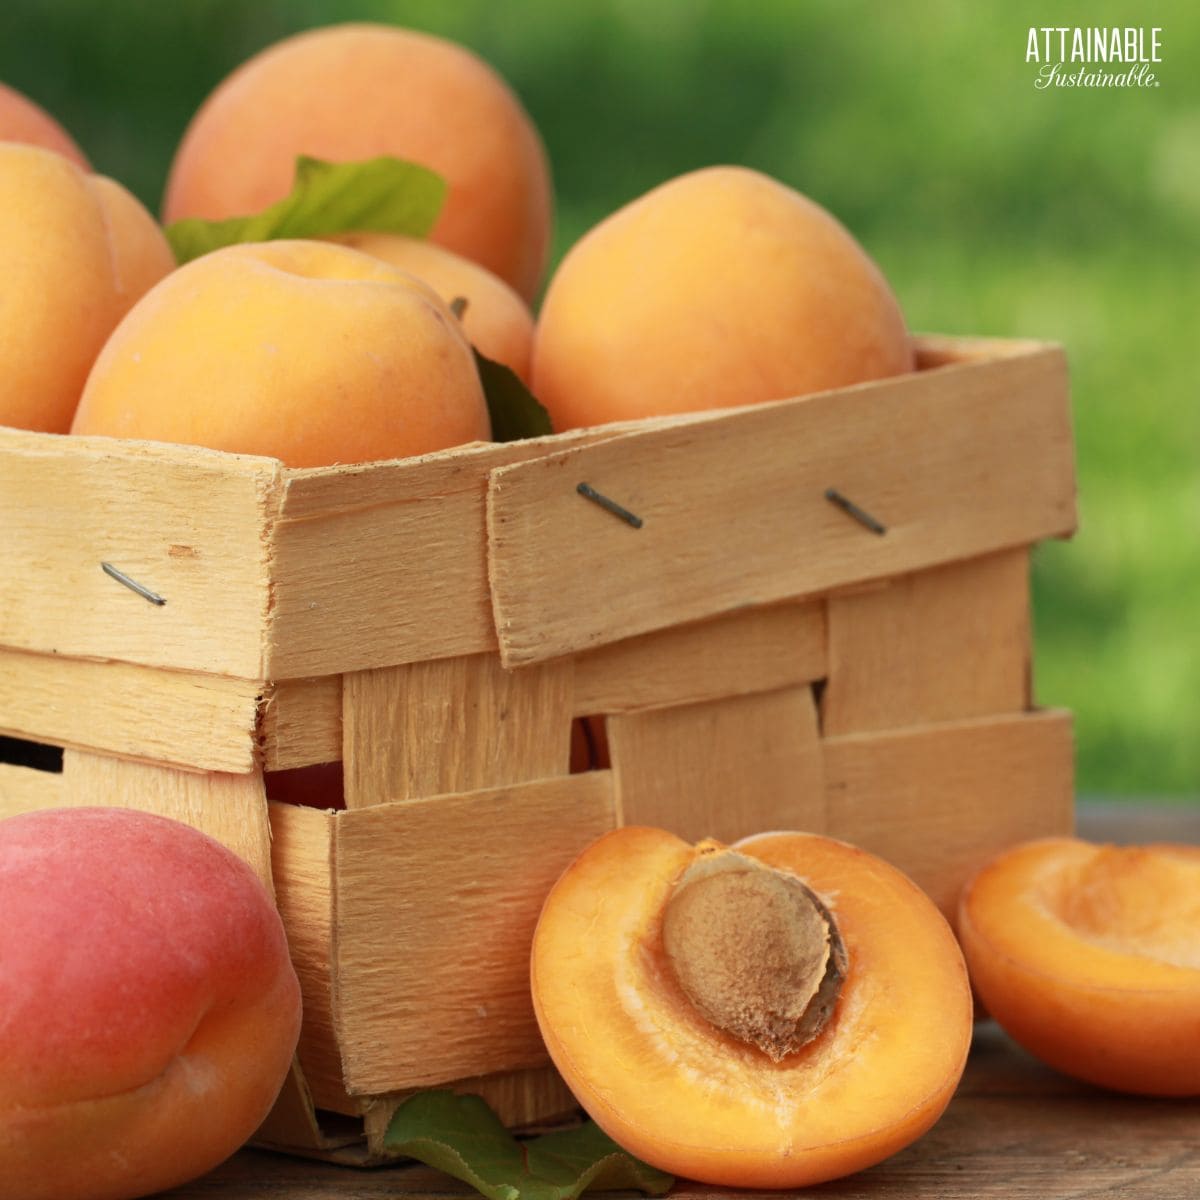 fresh apricots in a wooden basket, with two apricot halves in front of it.